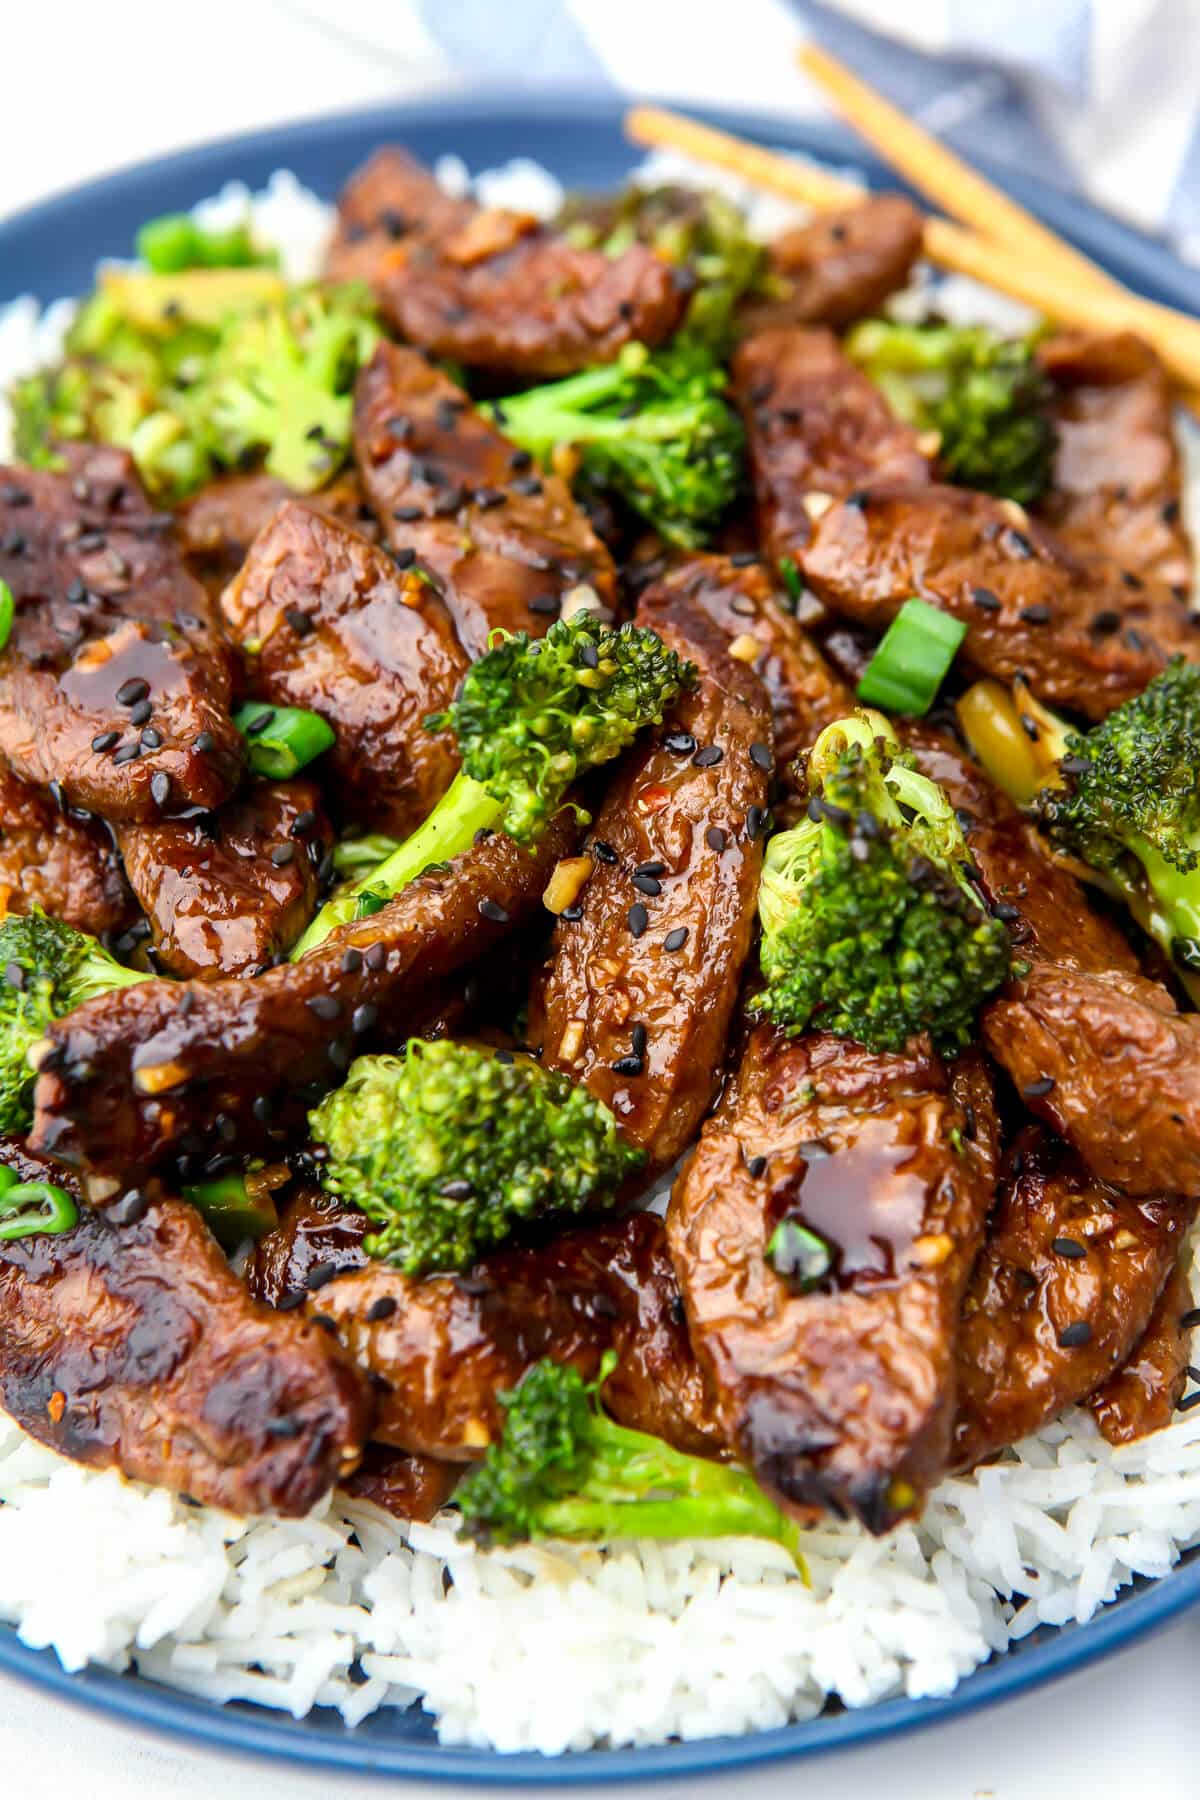 Vegan beef and broccoli served over a bed of white rice on a blue plate.